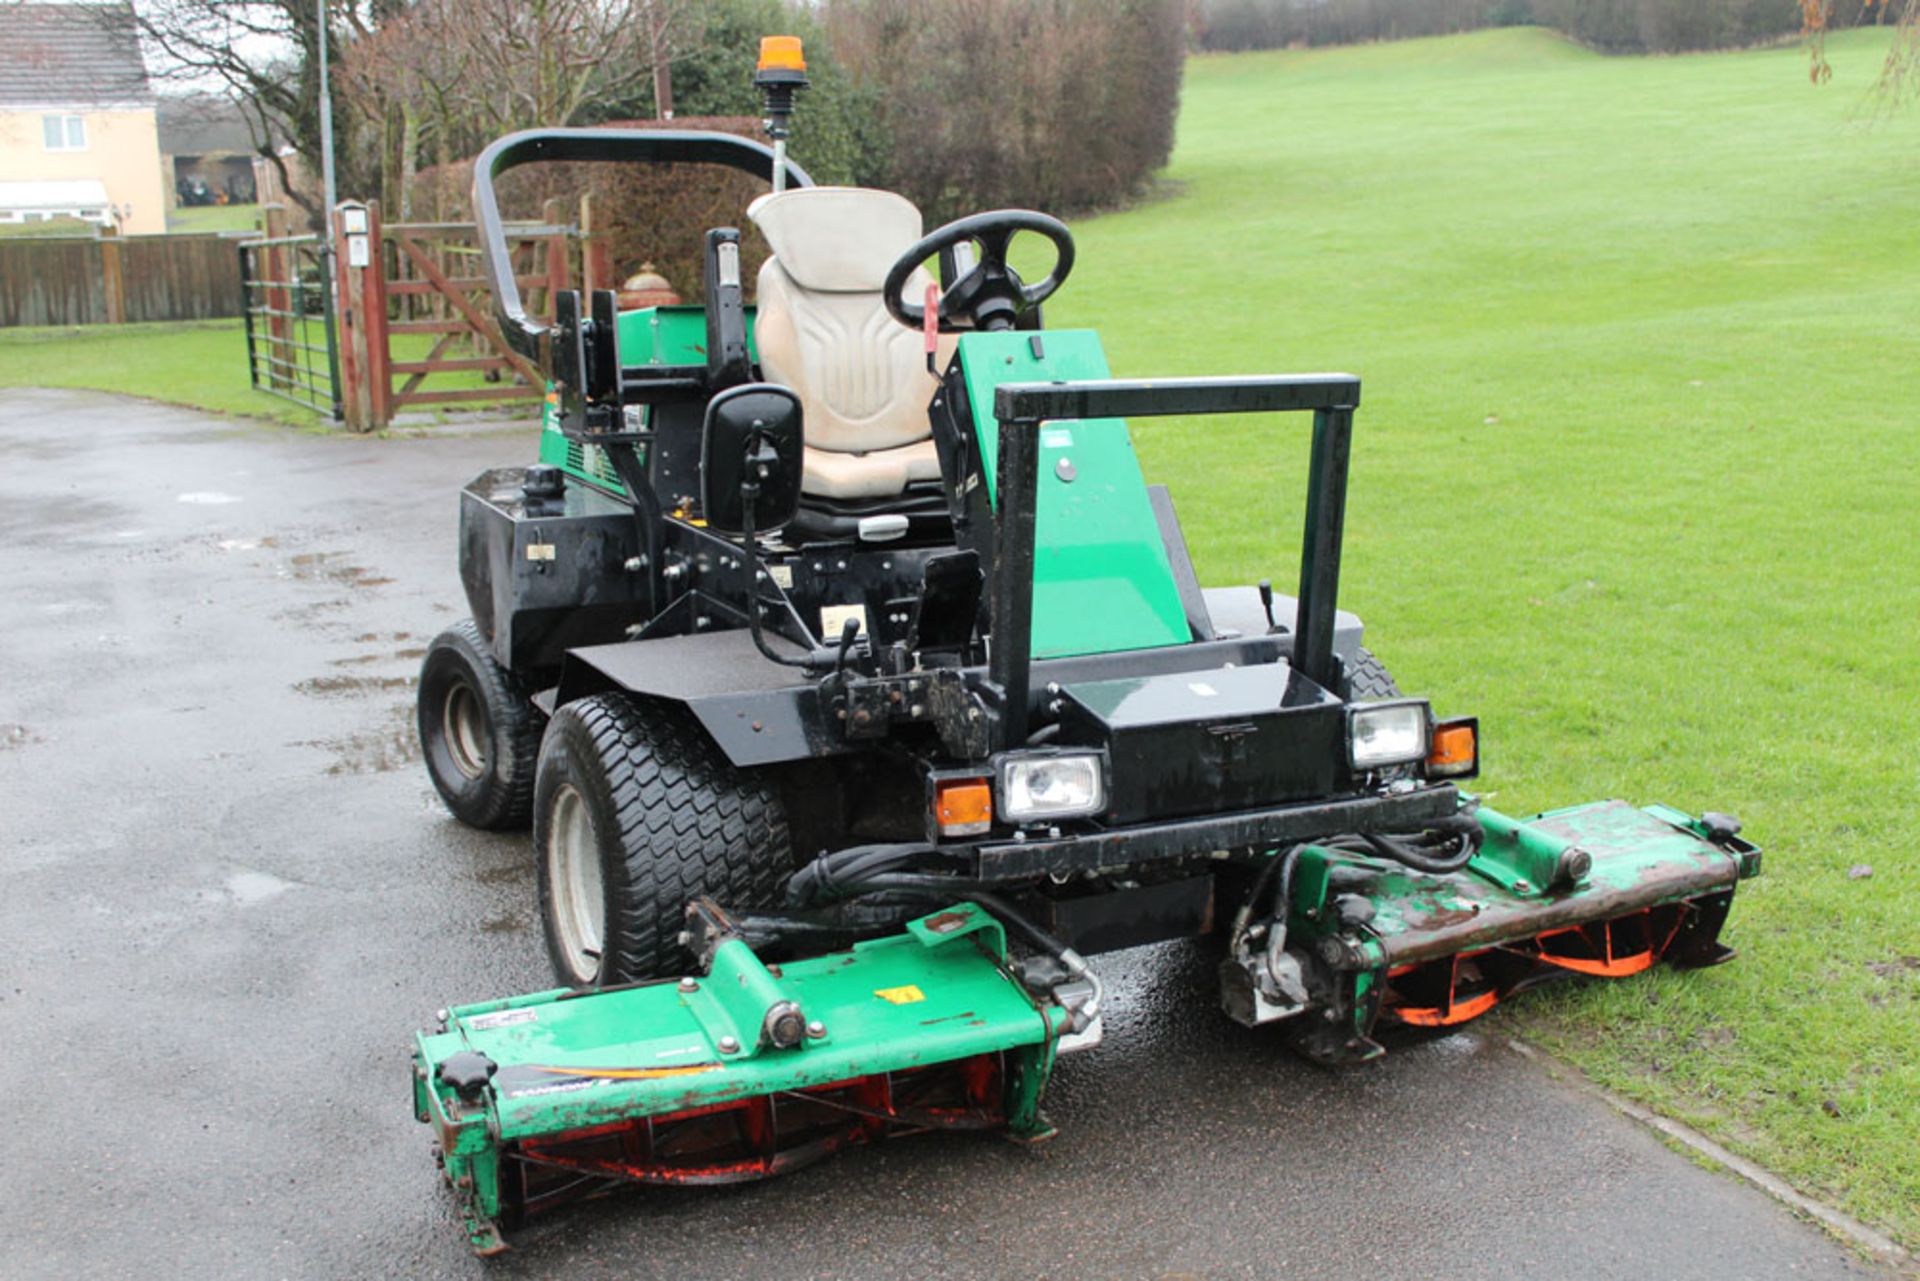 2010 Ransomes Parkway 2250 Plus Ride On Cylinder Mower - Image 6 of 8